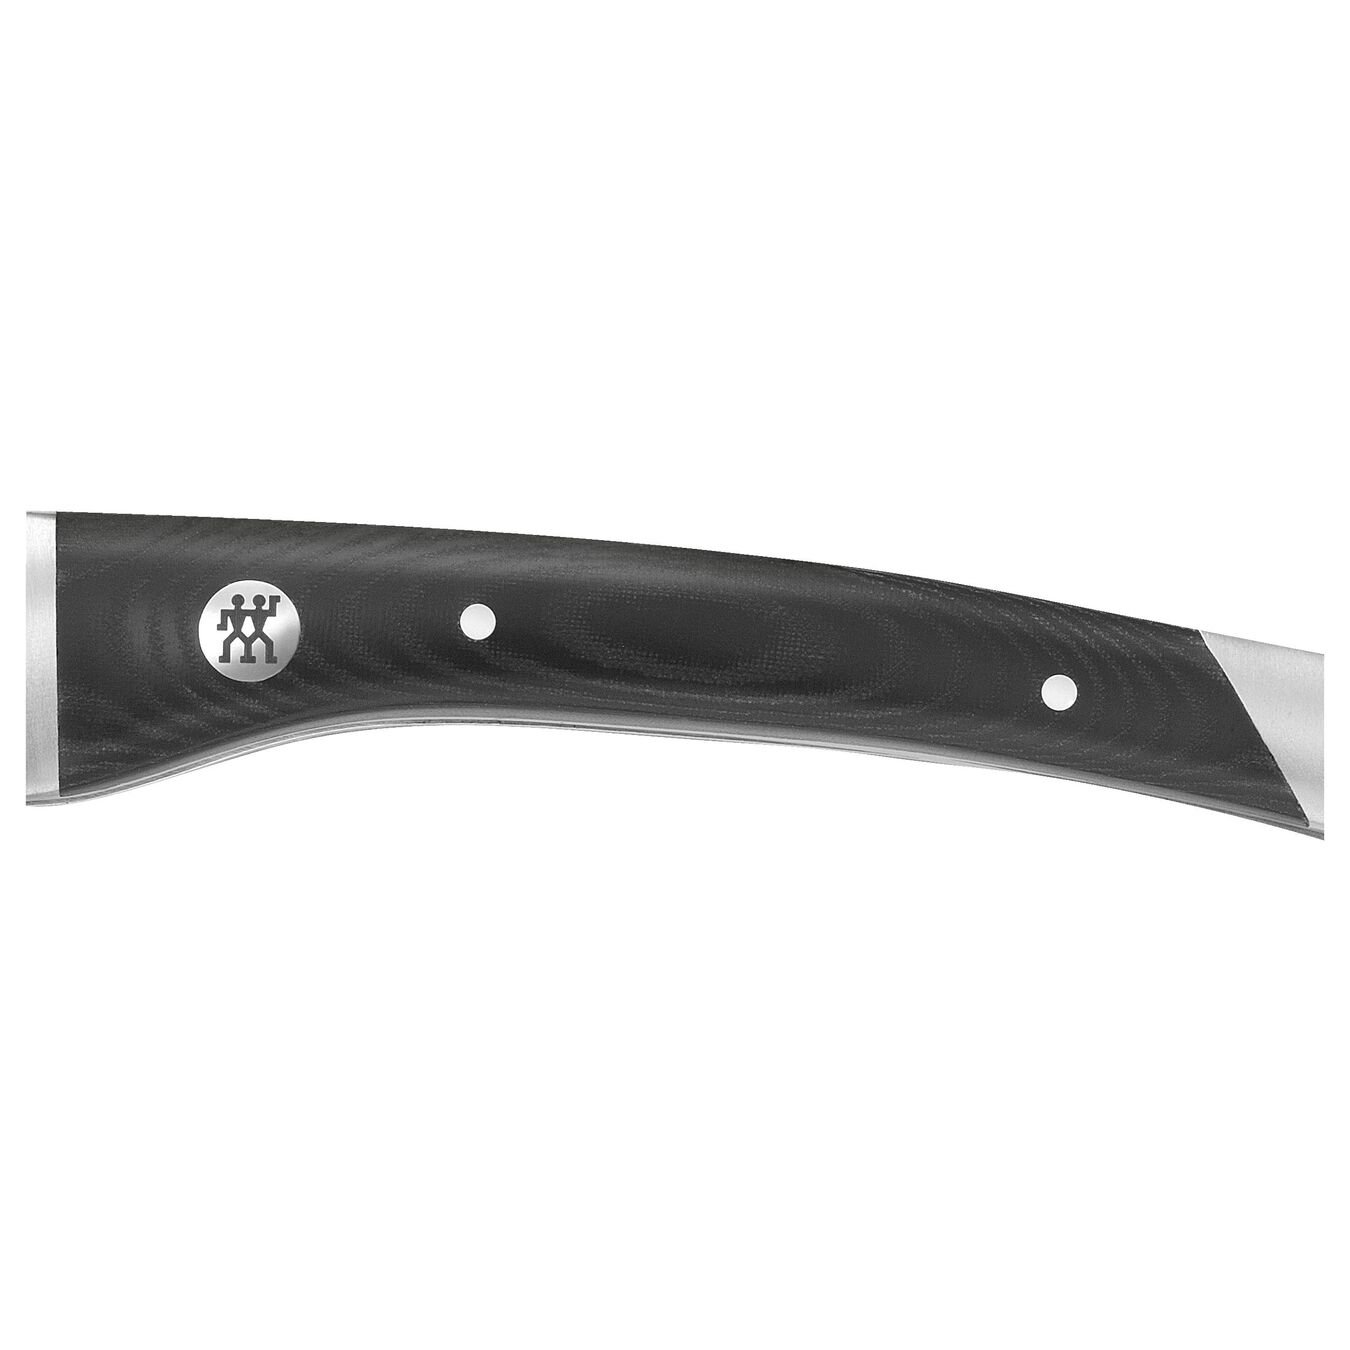 Waiter's knife, matted,,large 3